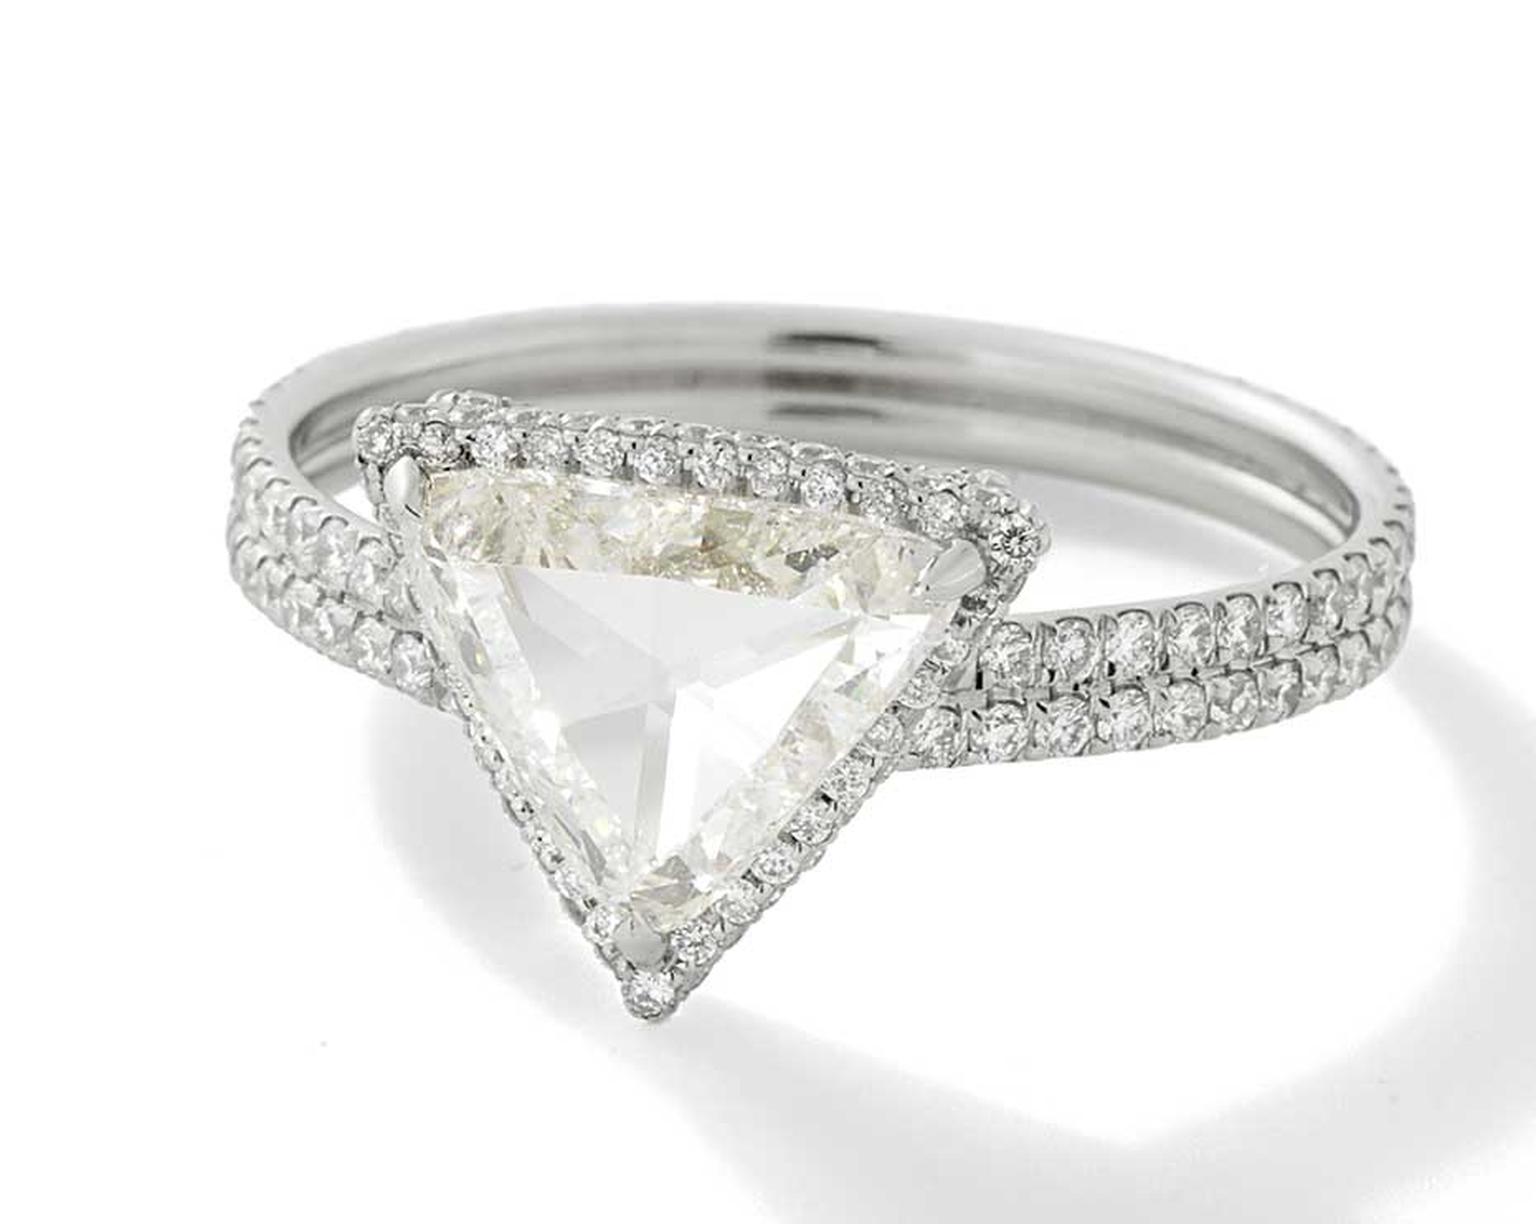 Monique Péan Mineraux engagement ring in recycled platinum, set with a white trillion rose cut diamond and white diamond pavé ($43,520)